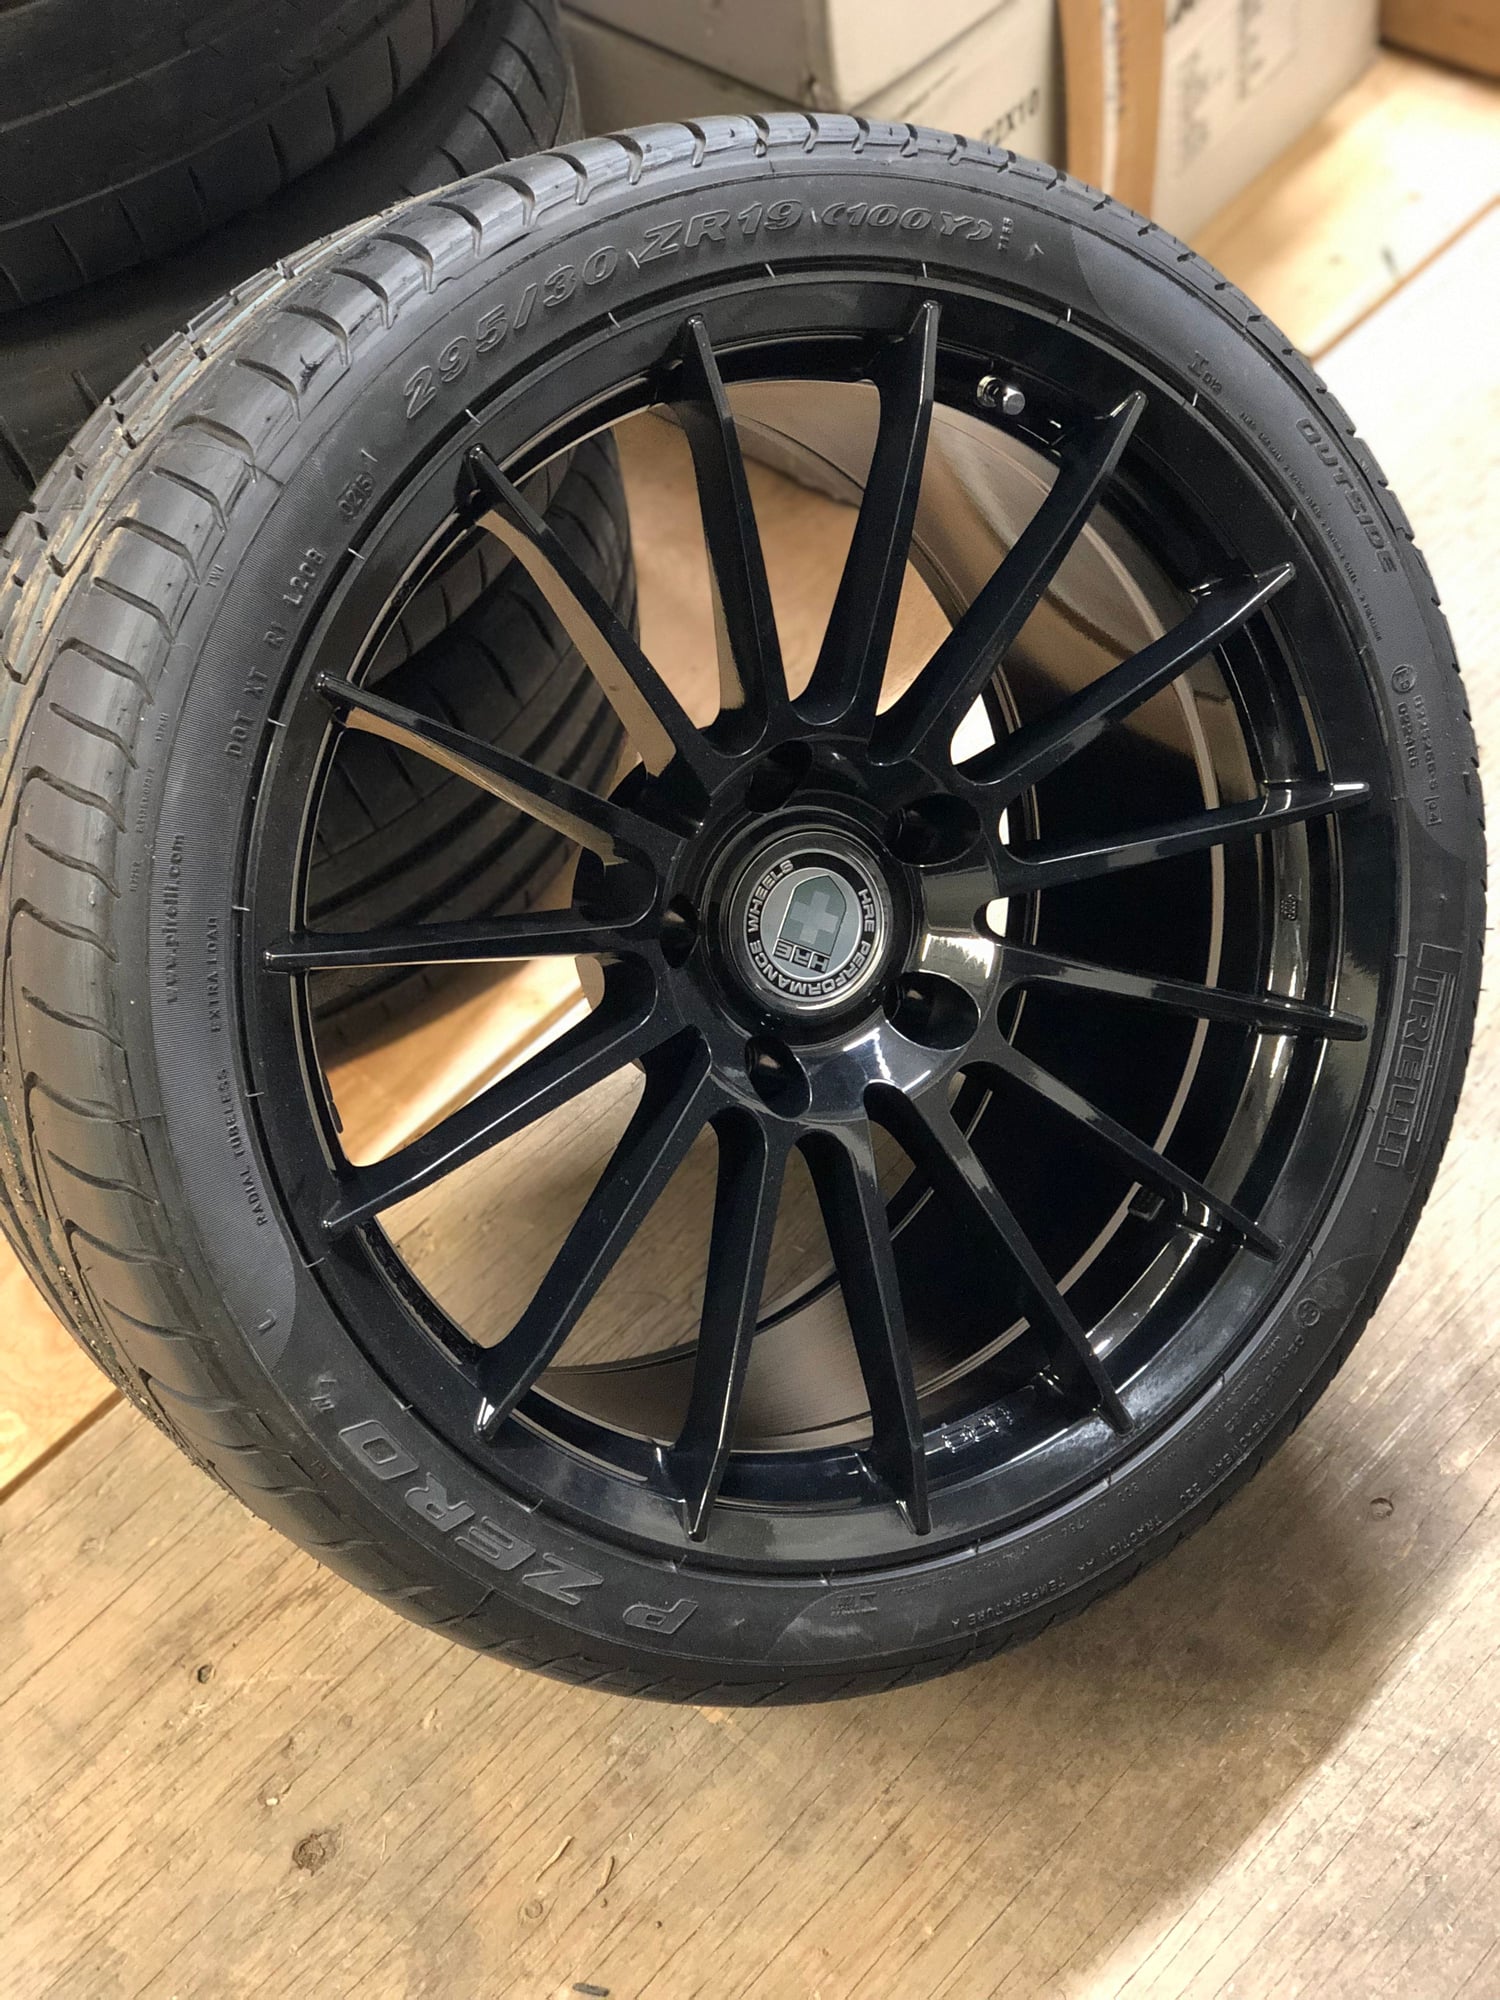 Wheels and Tires/Axles - Widebody 993 19" HRE Wheels & Tires - BRAND NEW - New - 1994 to 1998 Porsche 911 - 1999 to 2005 Porsche 911 - Winnipeg, MB R3R2Y6, Canada